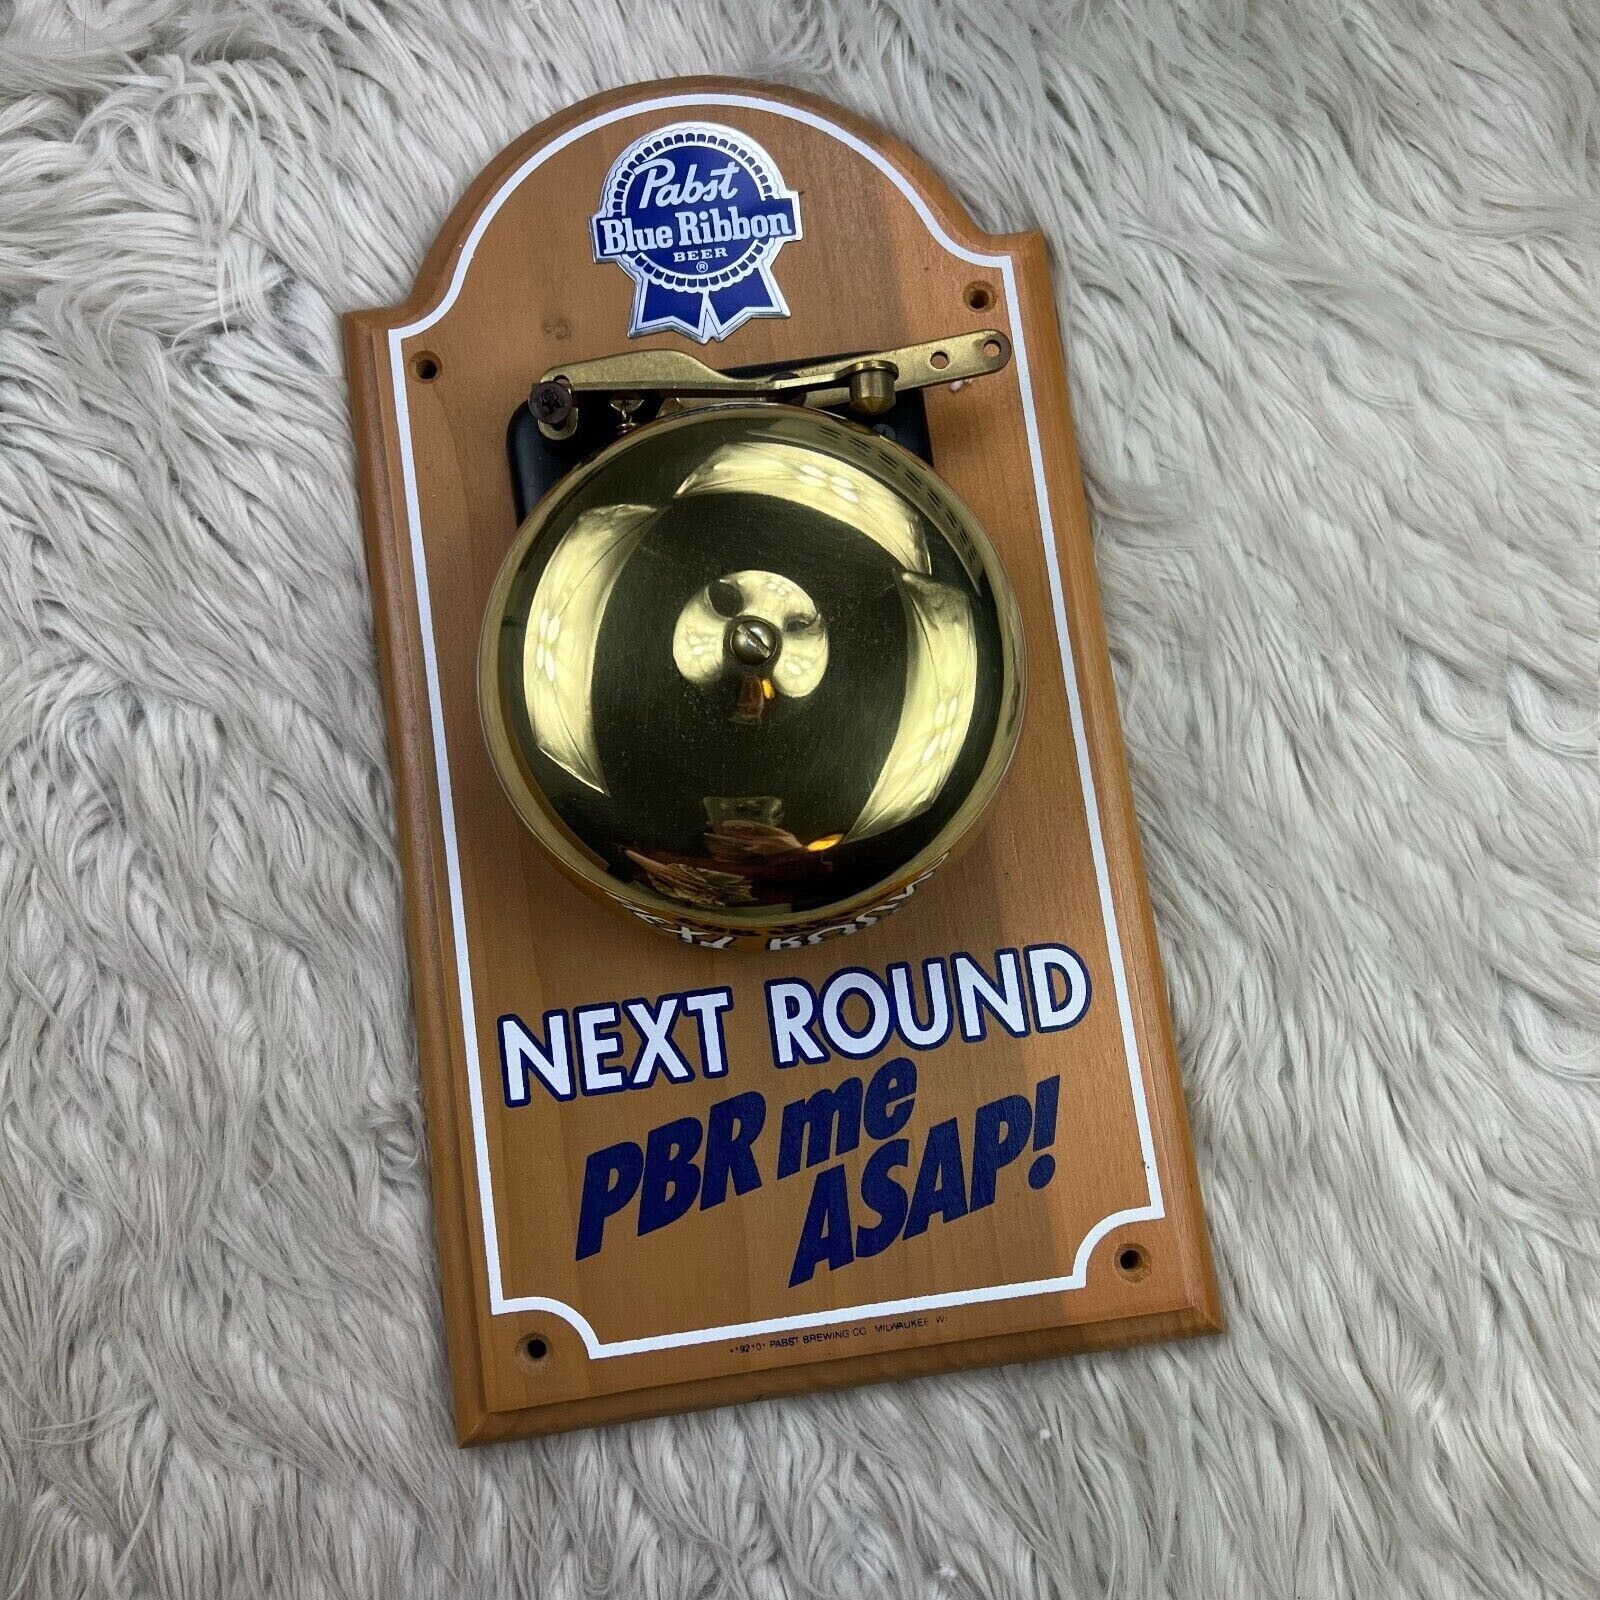 NEW - Vintage Pabst Blue Ribbon Next Round PBR Me ASAP Boxing Bell - No Chain